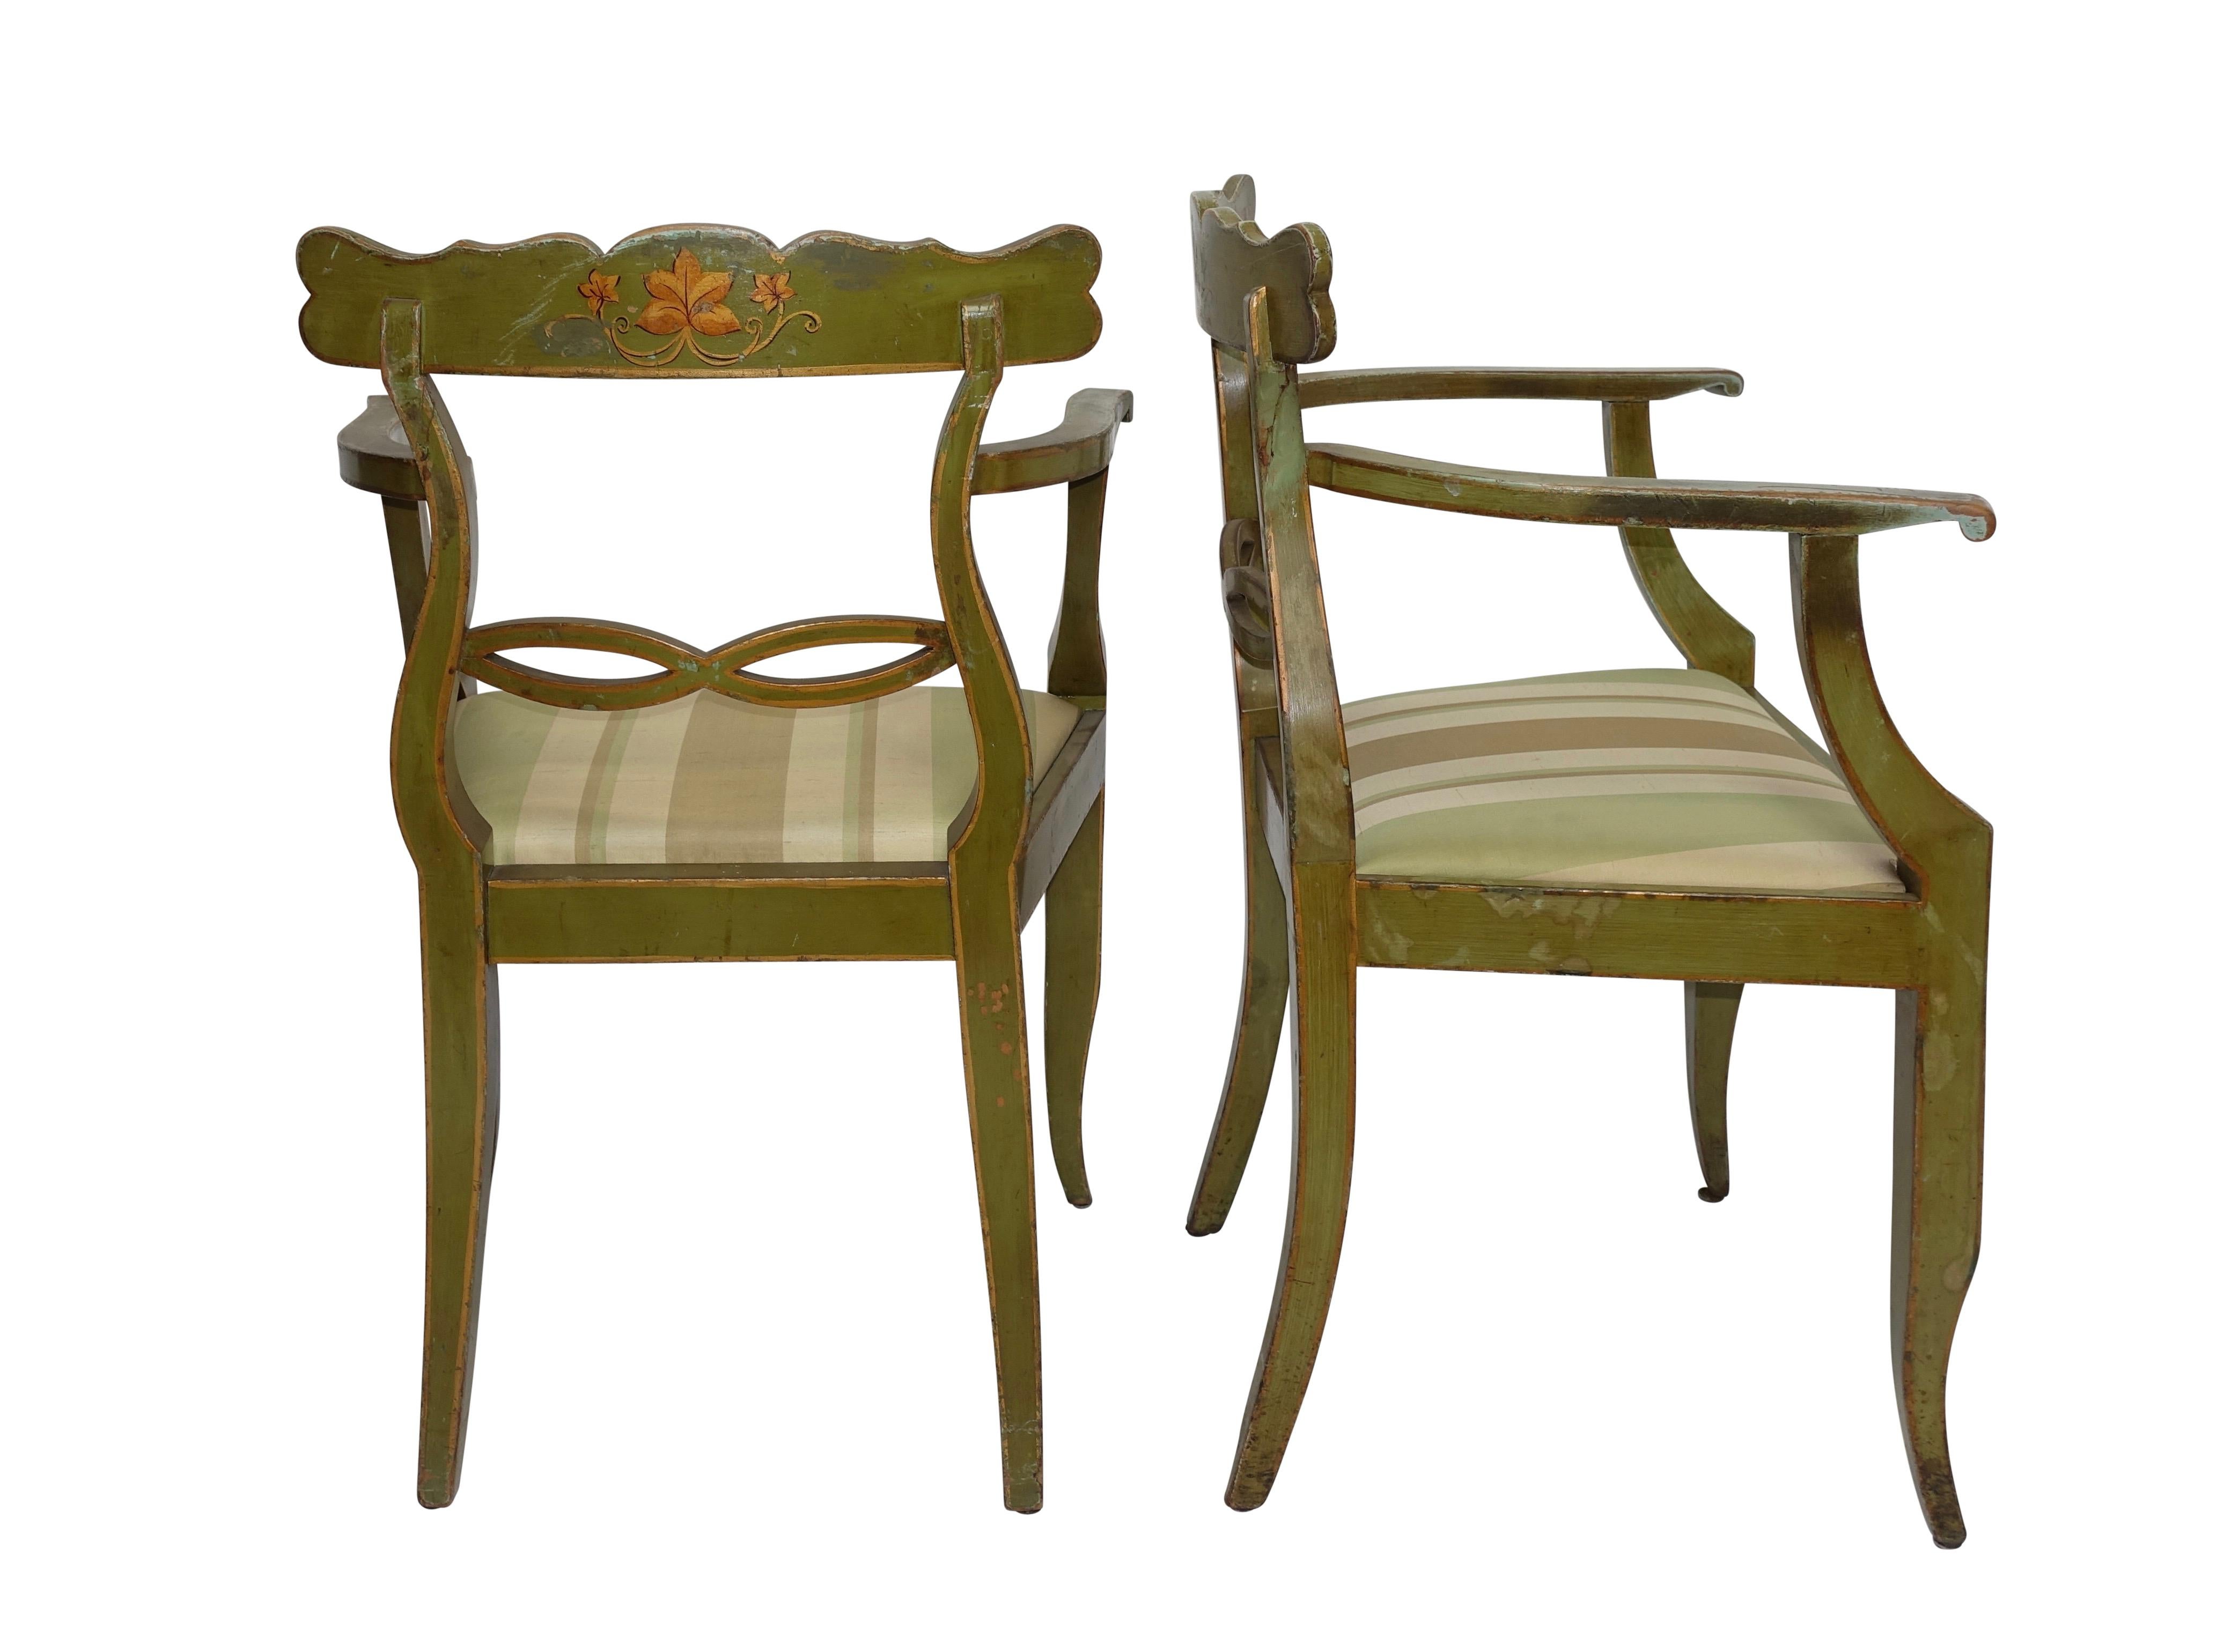 Wood Four Green Painted Armchairs with Trailing Ivy, Northern European, 19th Century For Sale